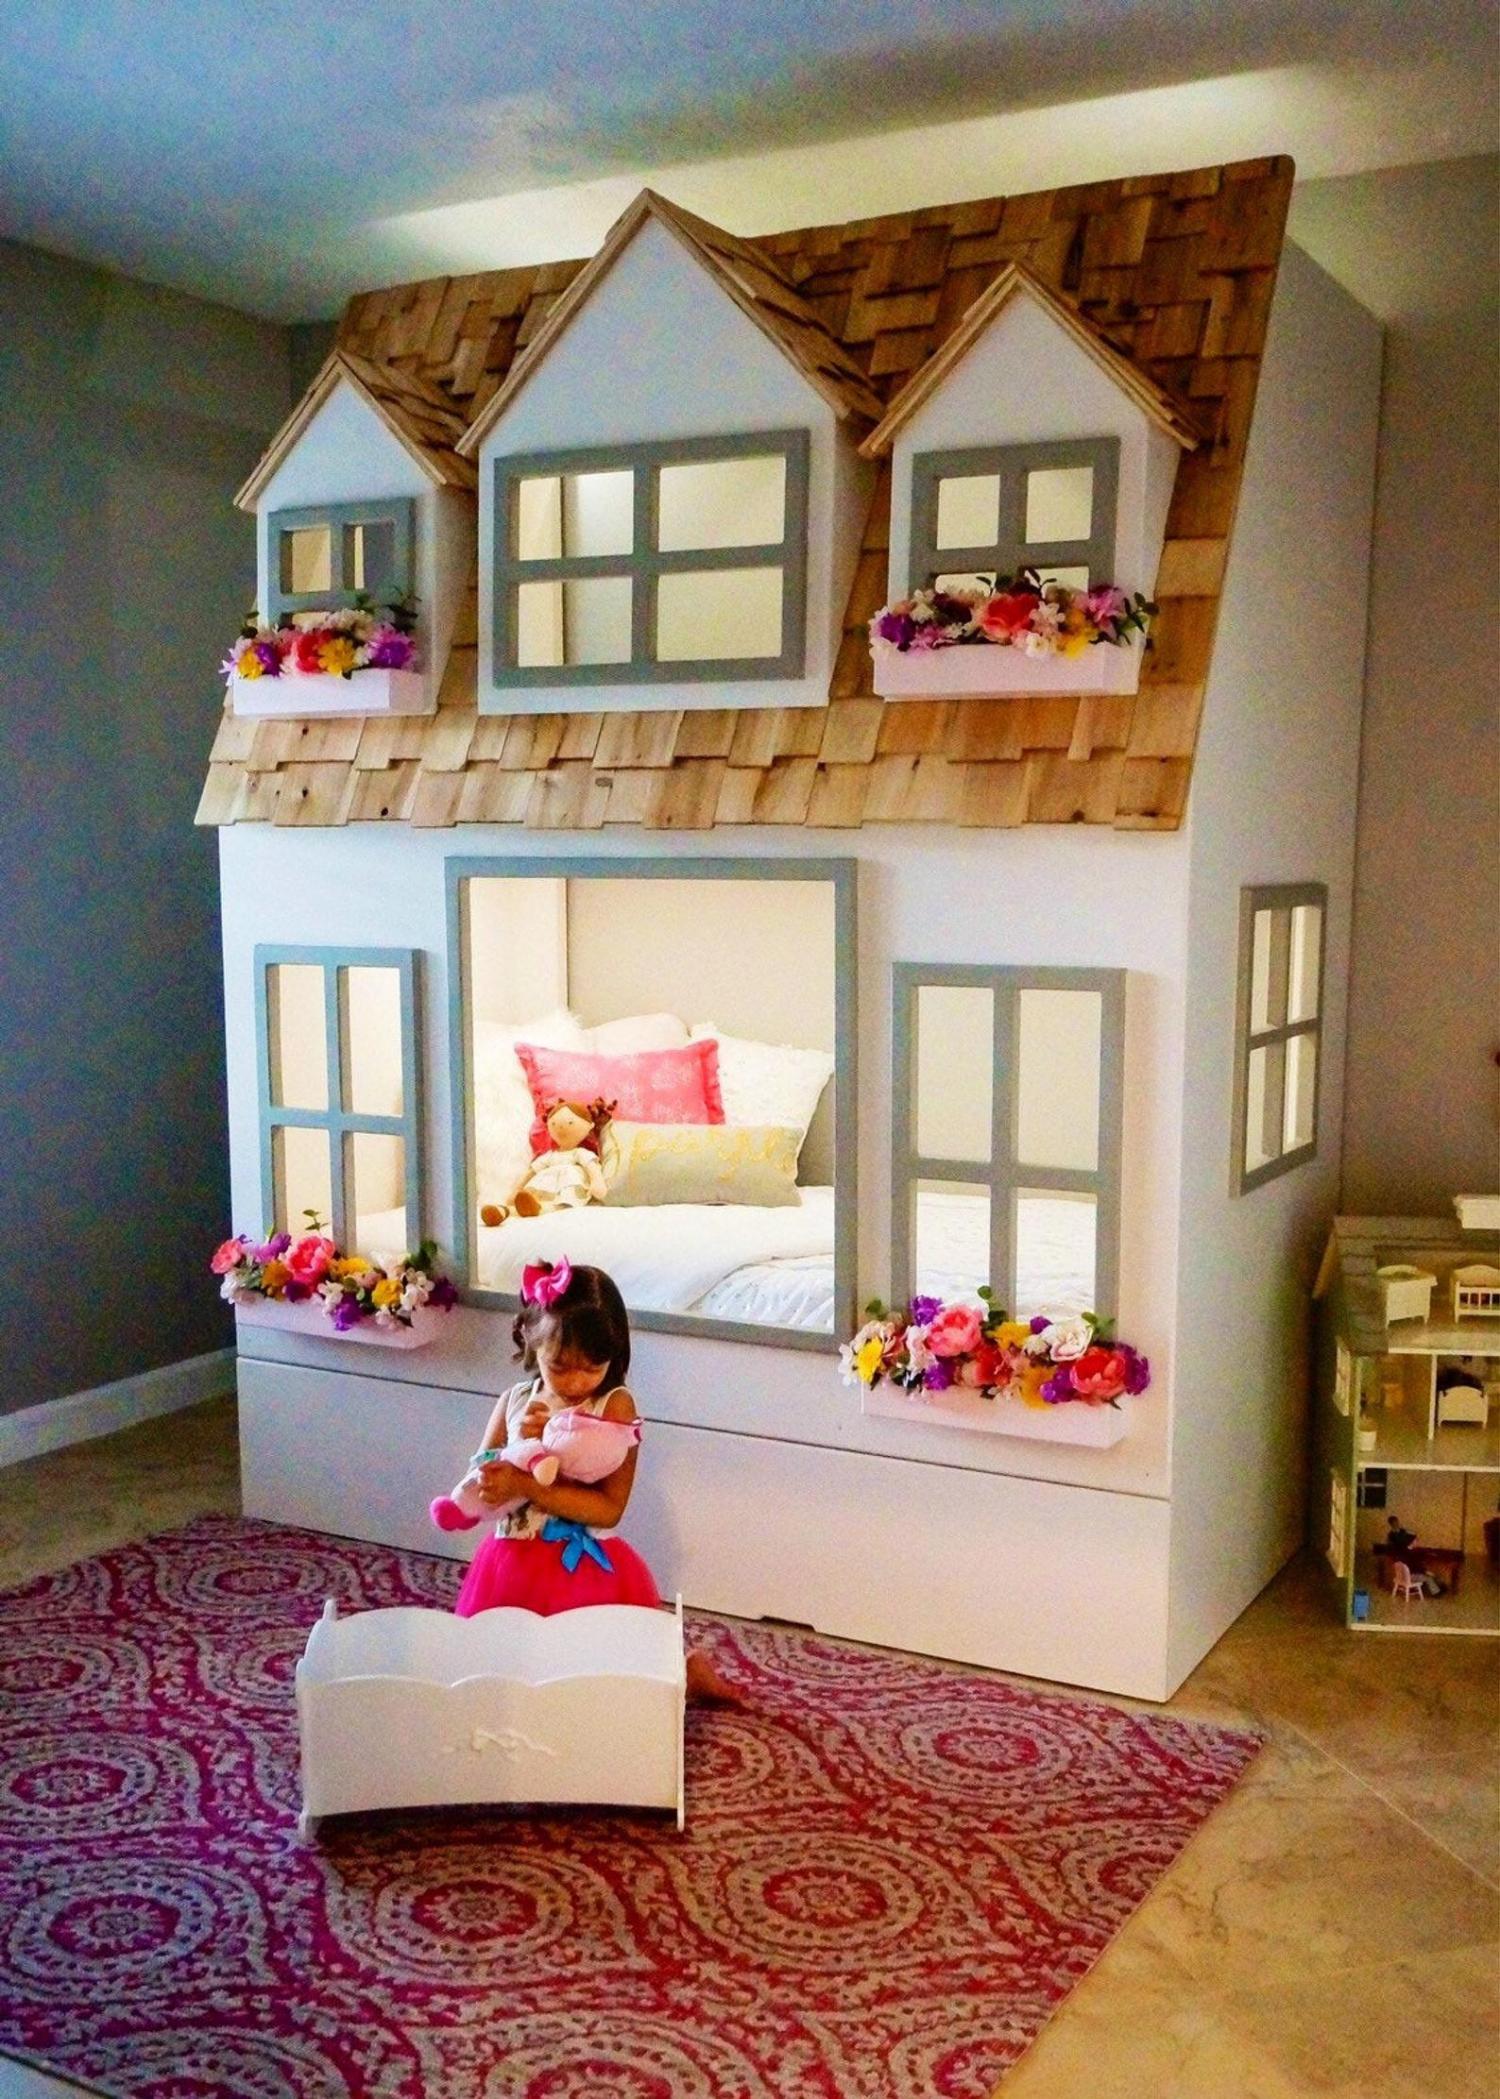 Giant Doll House Kids Bunk Bed, How To Make Doll House Bunk Beds